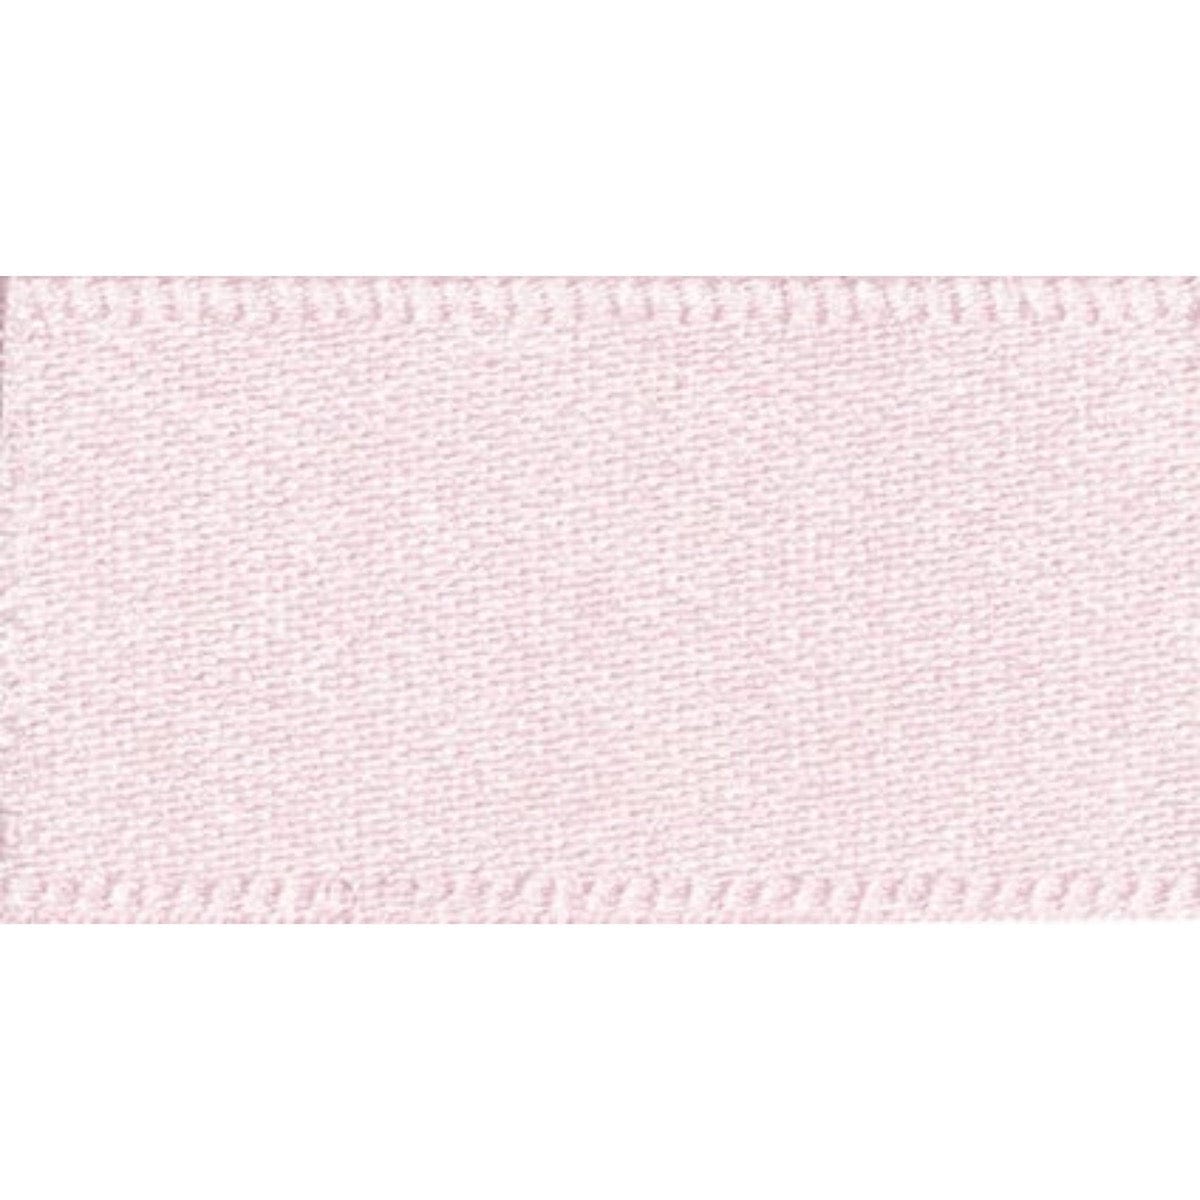 Double Faced Satin Ribbon Pale Pink: 3mm wide. Price per metre.